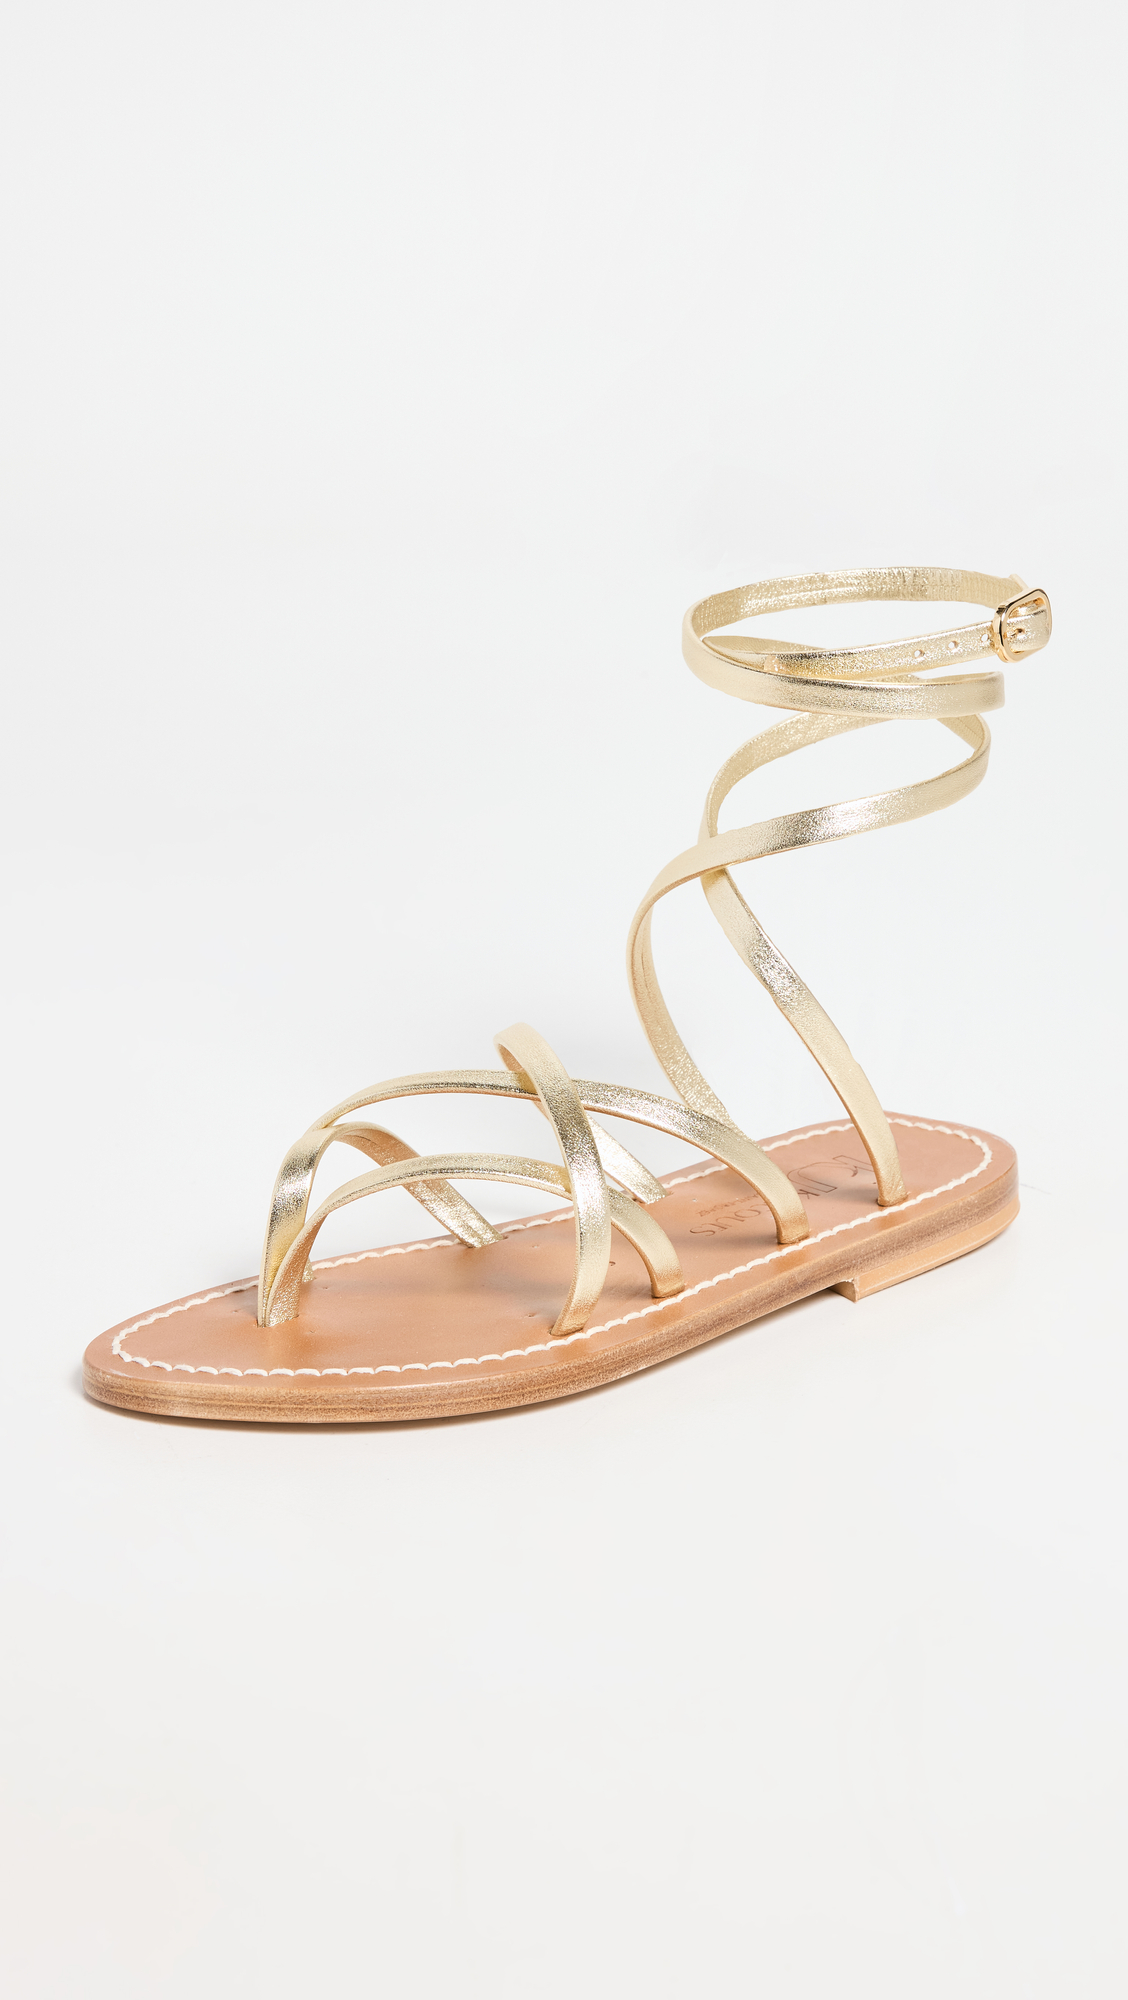 Gladiator Sandals Are Back—Shop the 27 Chicest Versions | Who What Wear